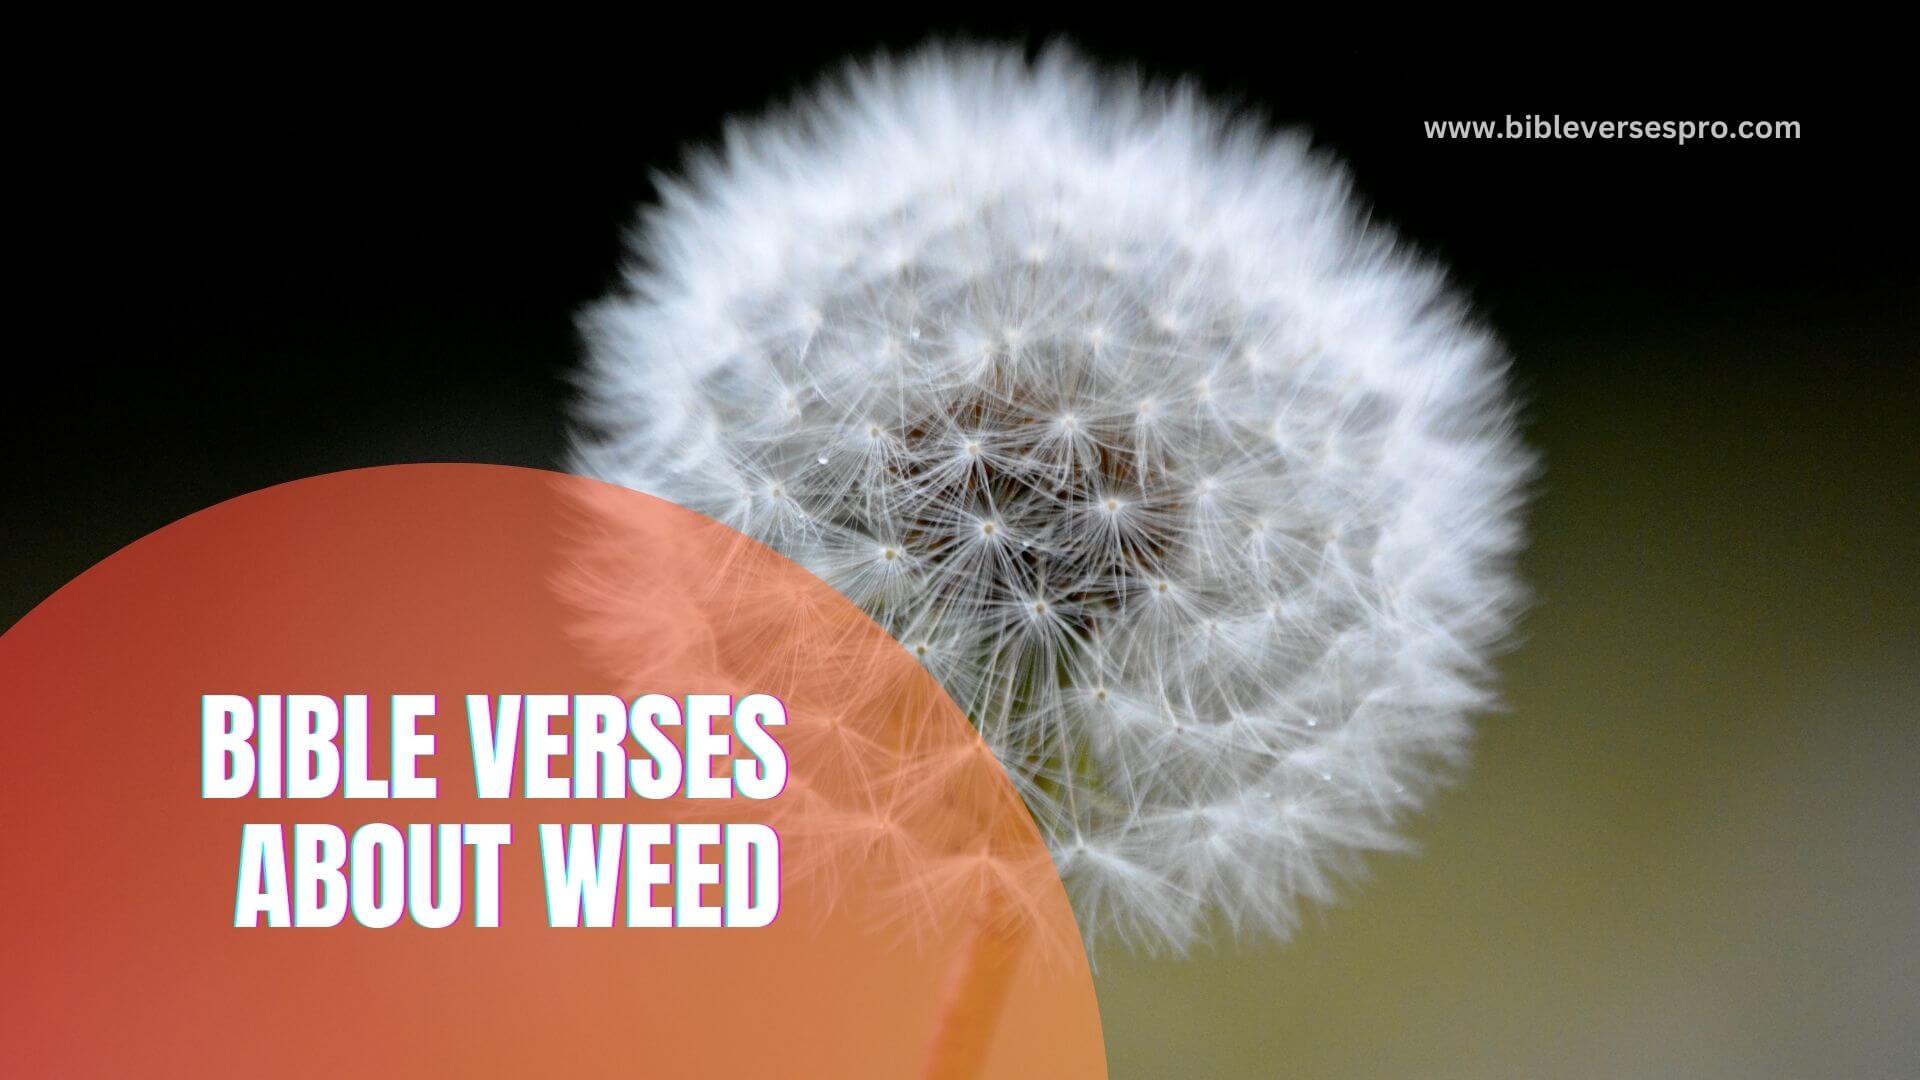 BIBLE VERSES ABOUT WEED (1) (1)